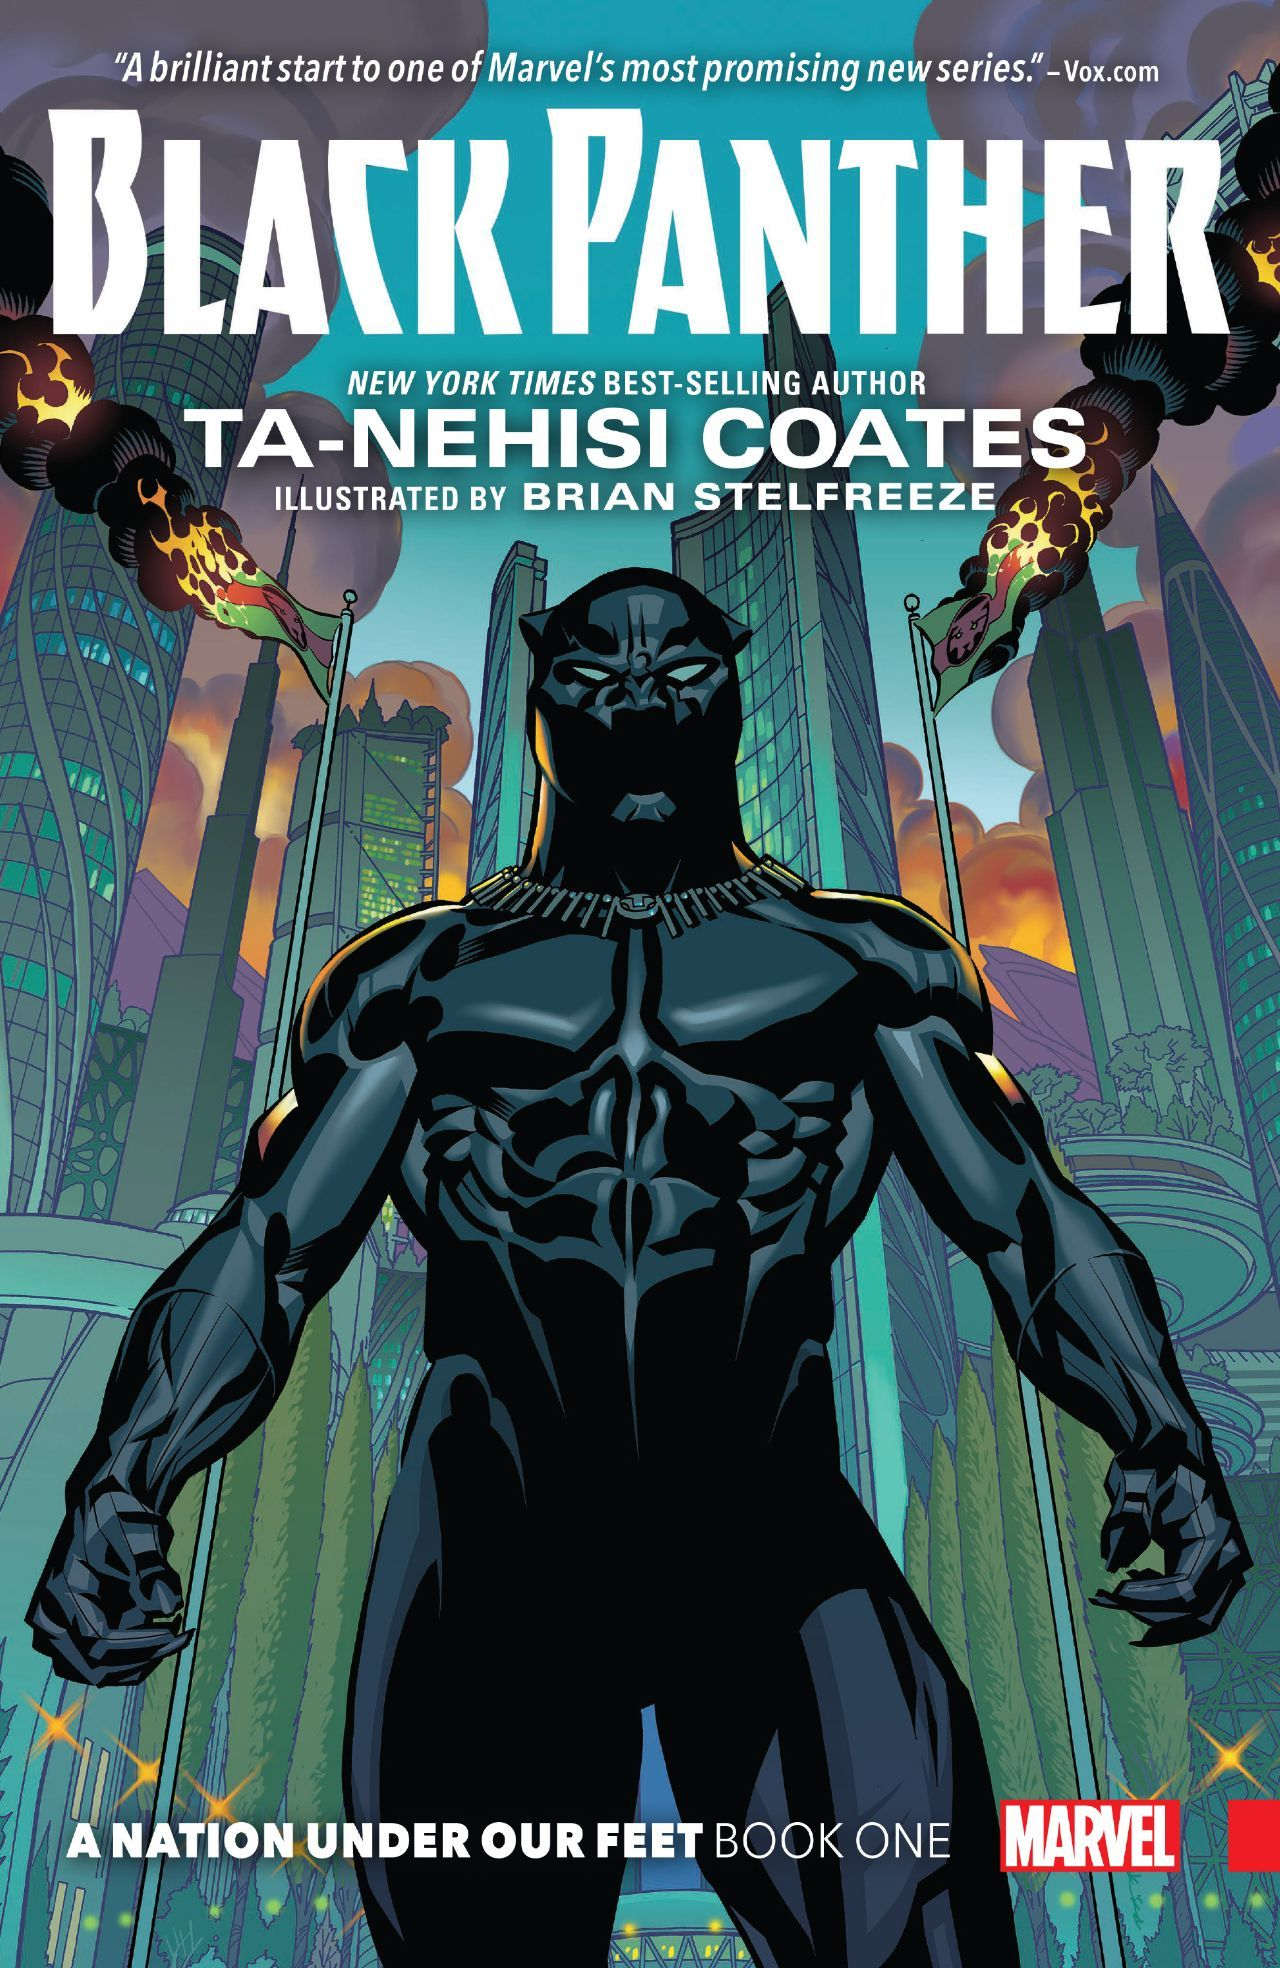 Black Panther And Beyond: 30 Comics You Should Read For Black History Month